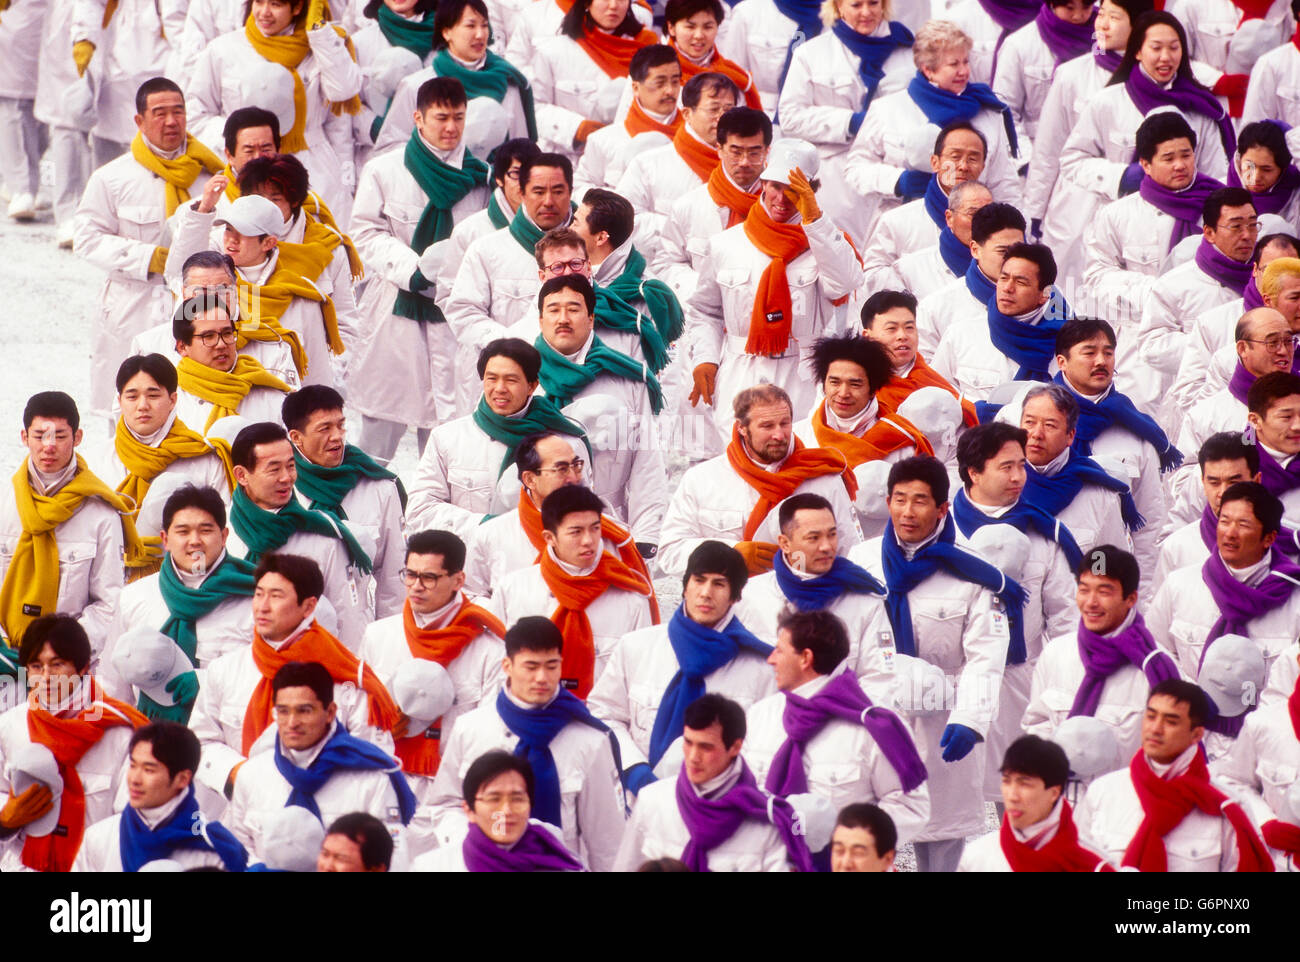 Team Japan marching in the Opening ceremonies at the 1998 Olympic Winter Games, Nagano, Japan Stock Photo